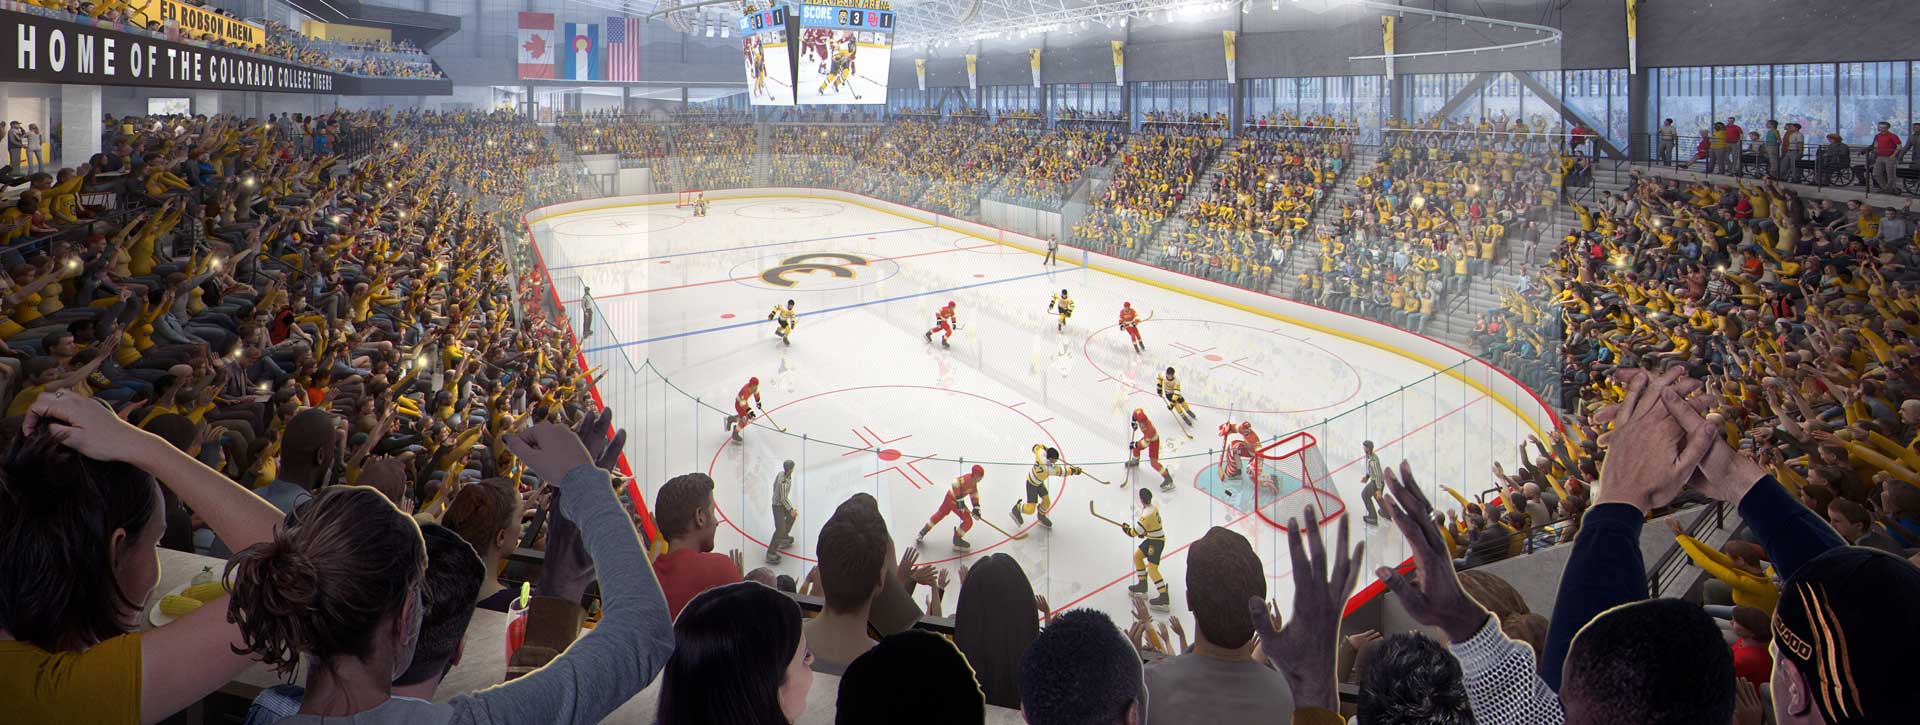 Ed Robson Arena south side; architectural rendering by JLG Architects